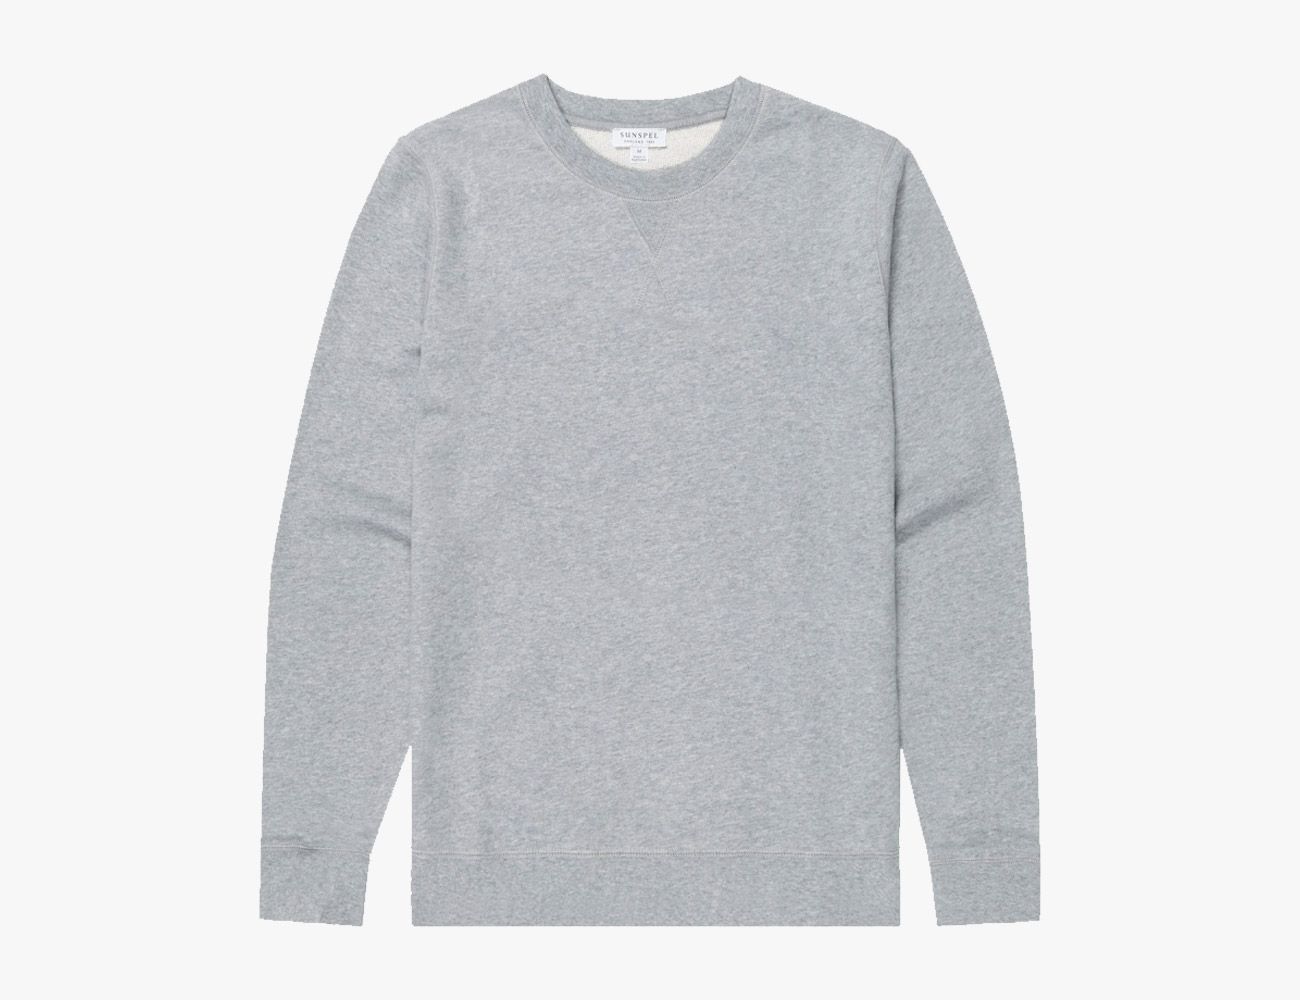 The Best Crewneck Sweatshirts for Your Classic, Casual Outfits